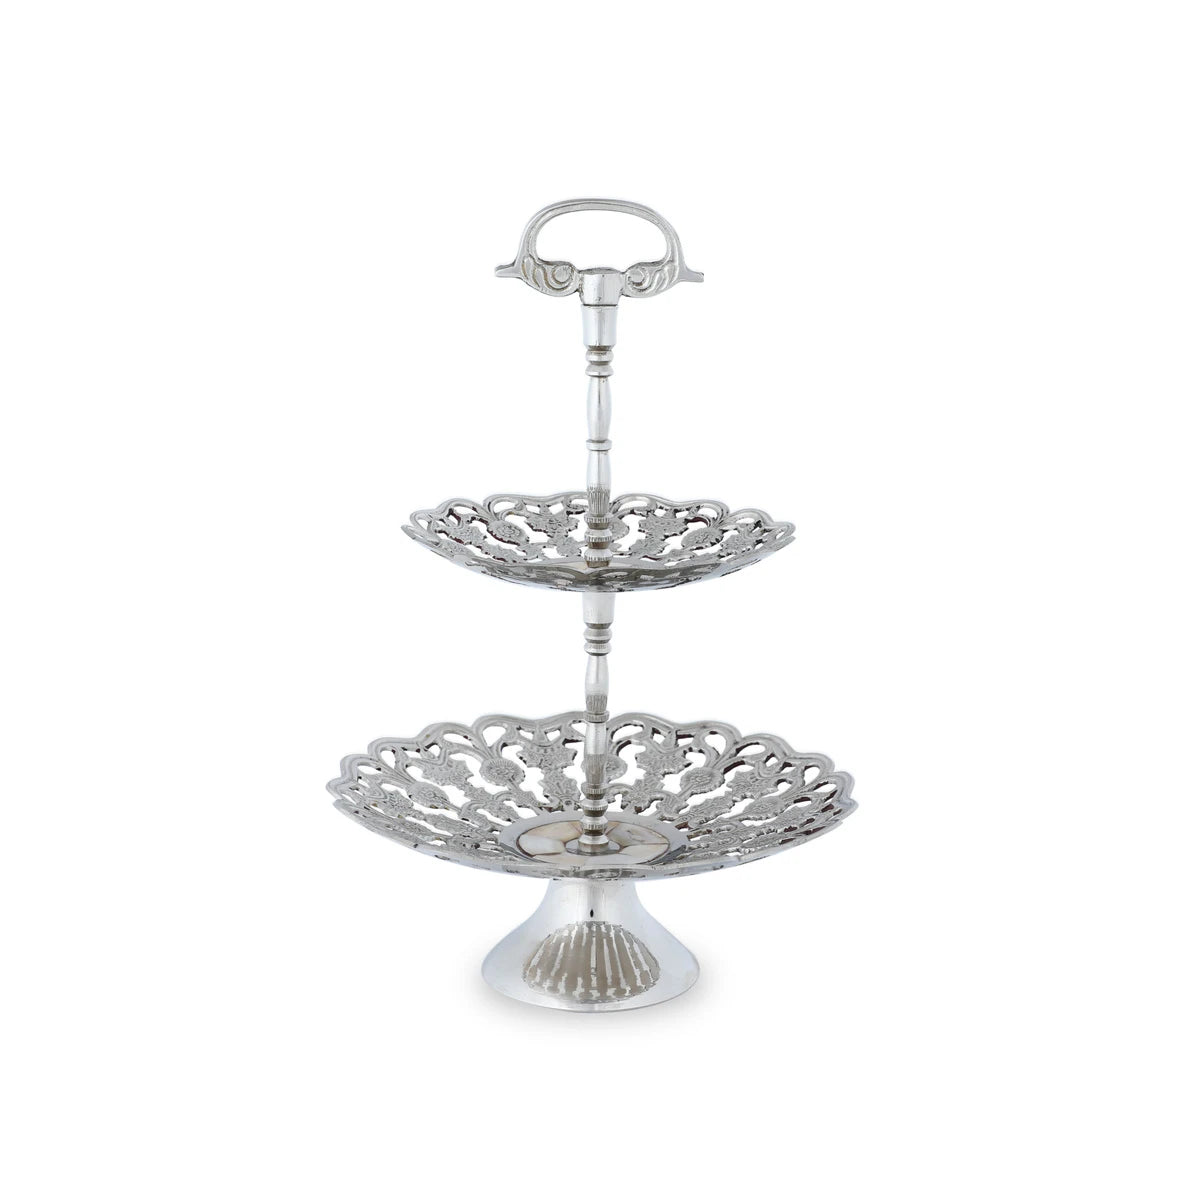 Decorative Pedestal Base Glossy Silver Colored Metallic 2-Tier Fruit Stand with Banana Hooks